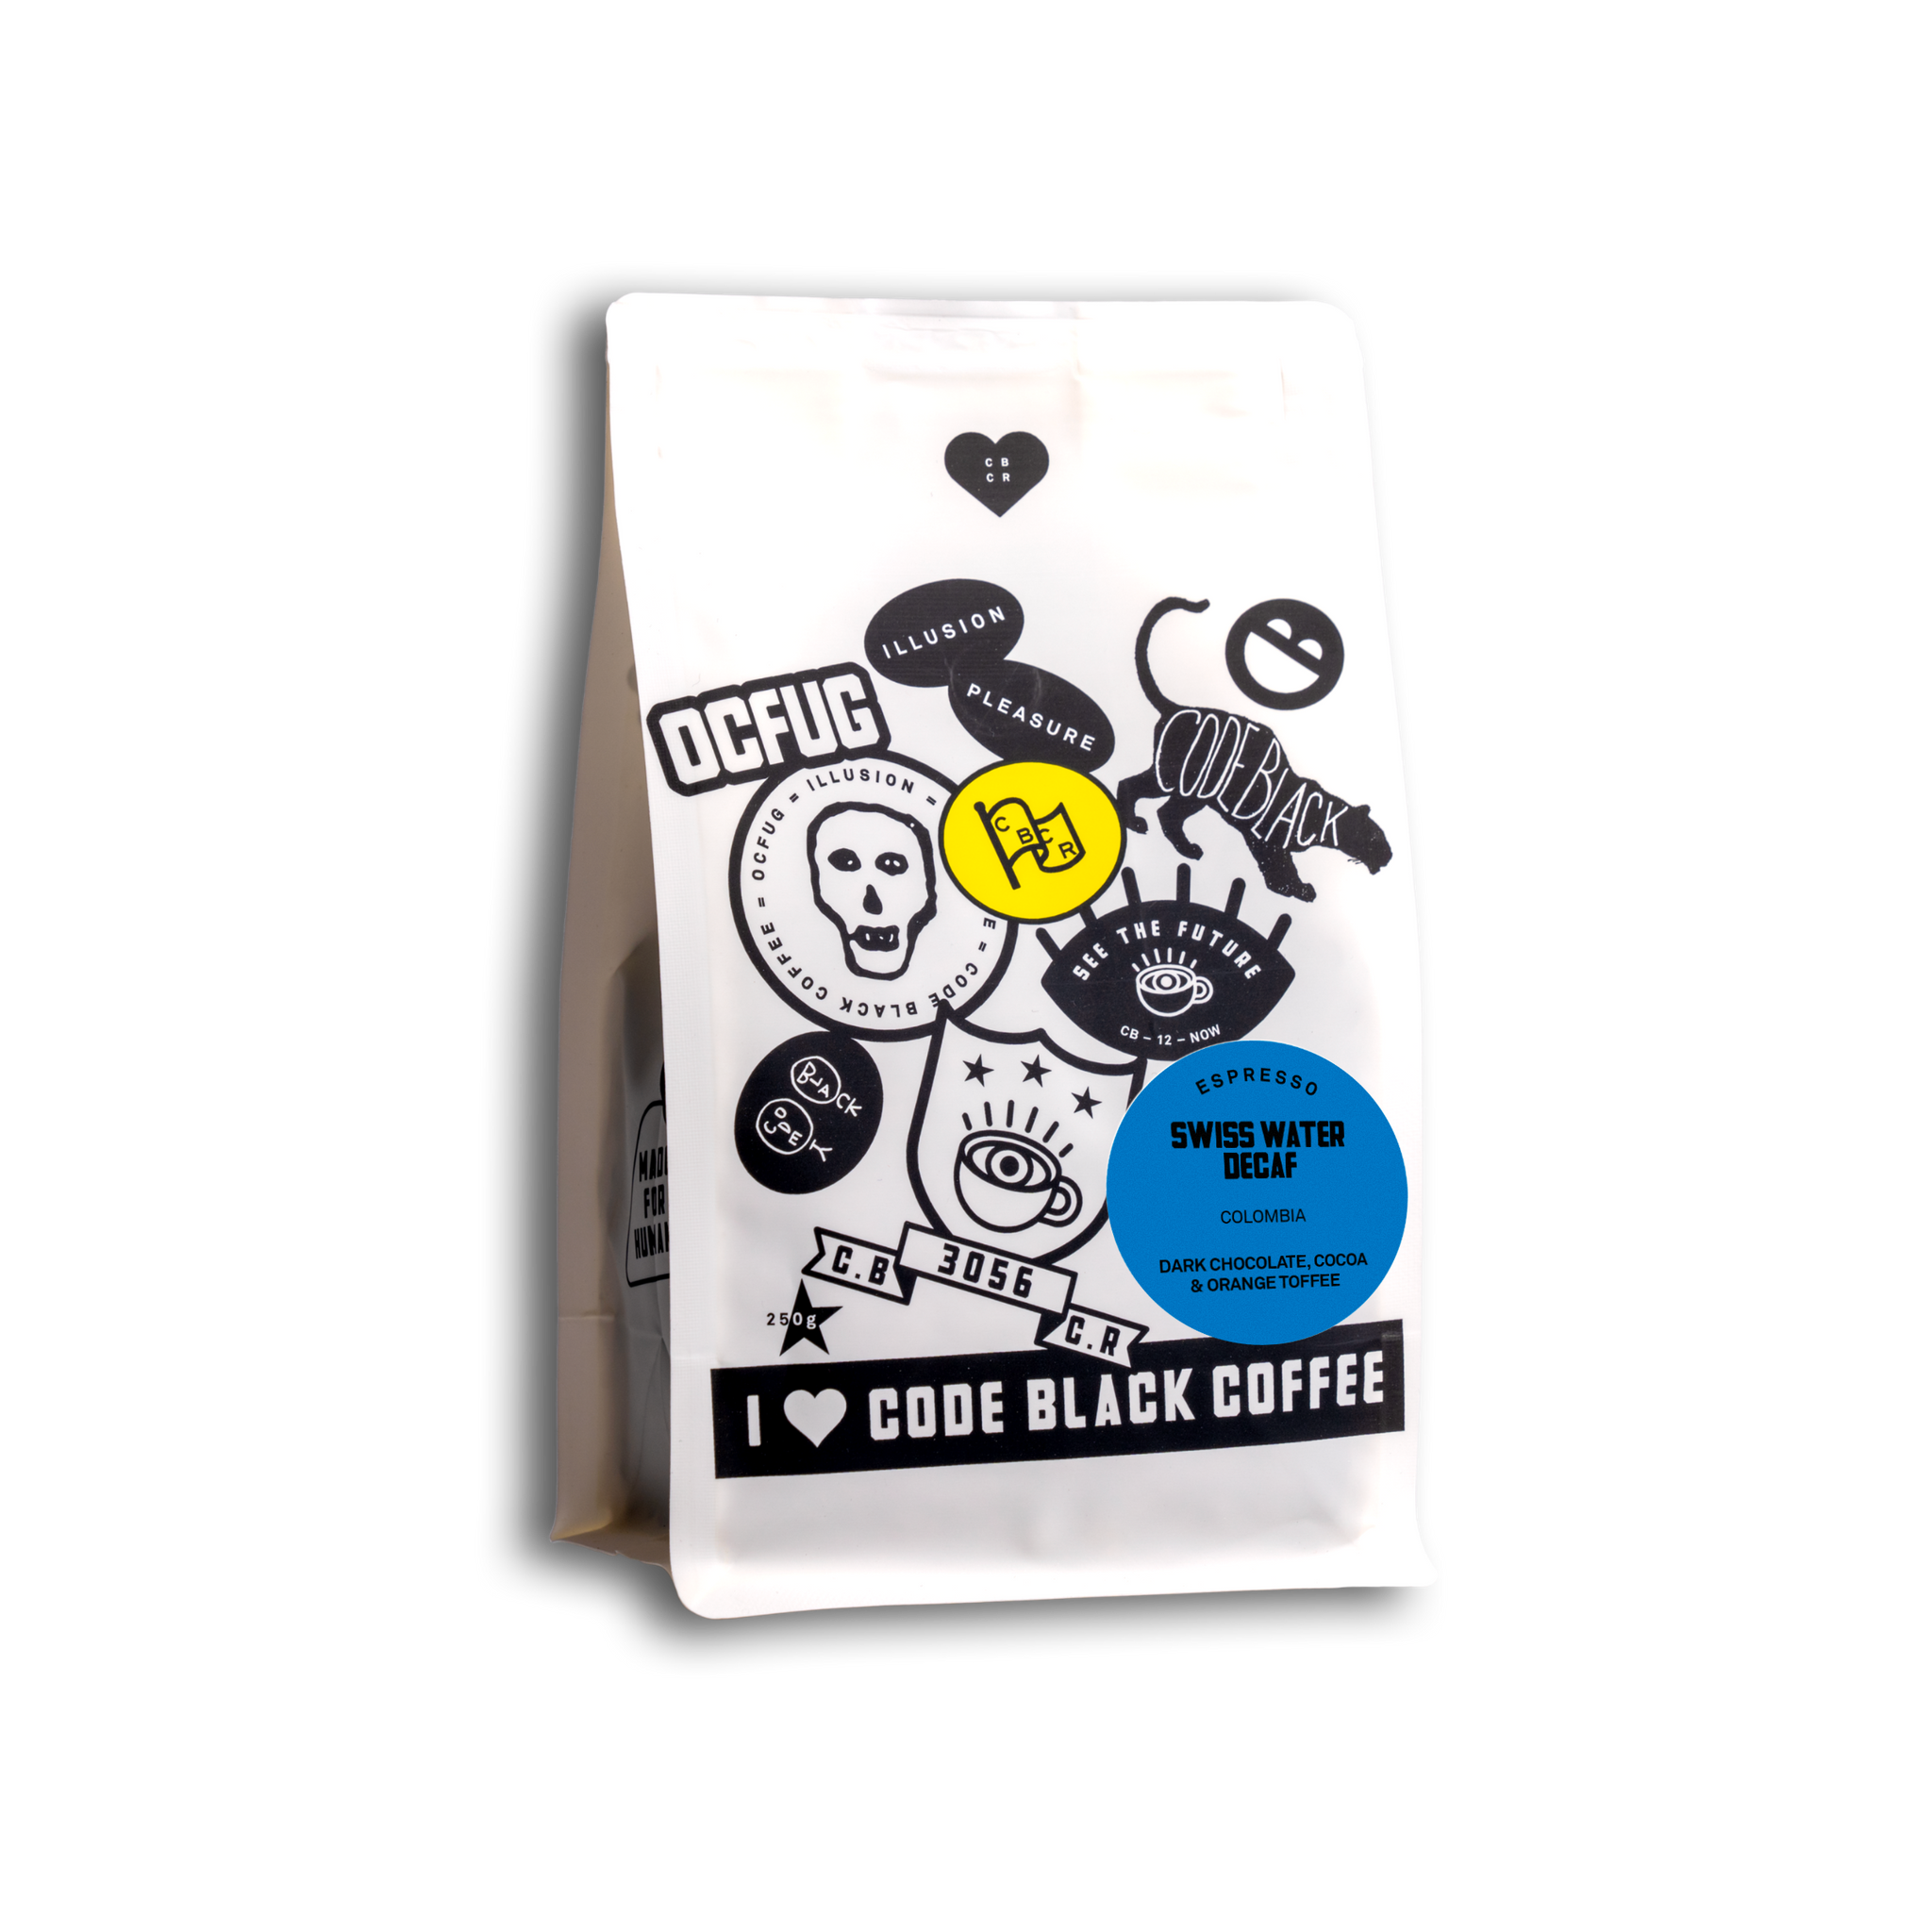 Colombia Swiss Water Decaf Espresso